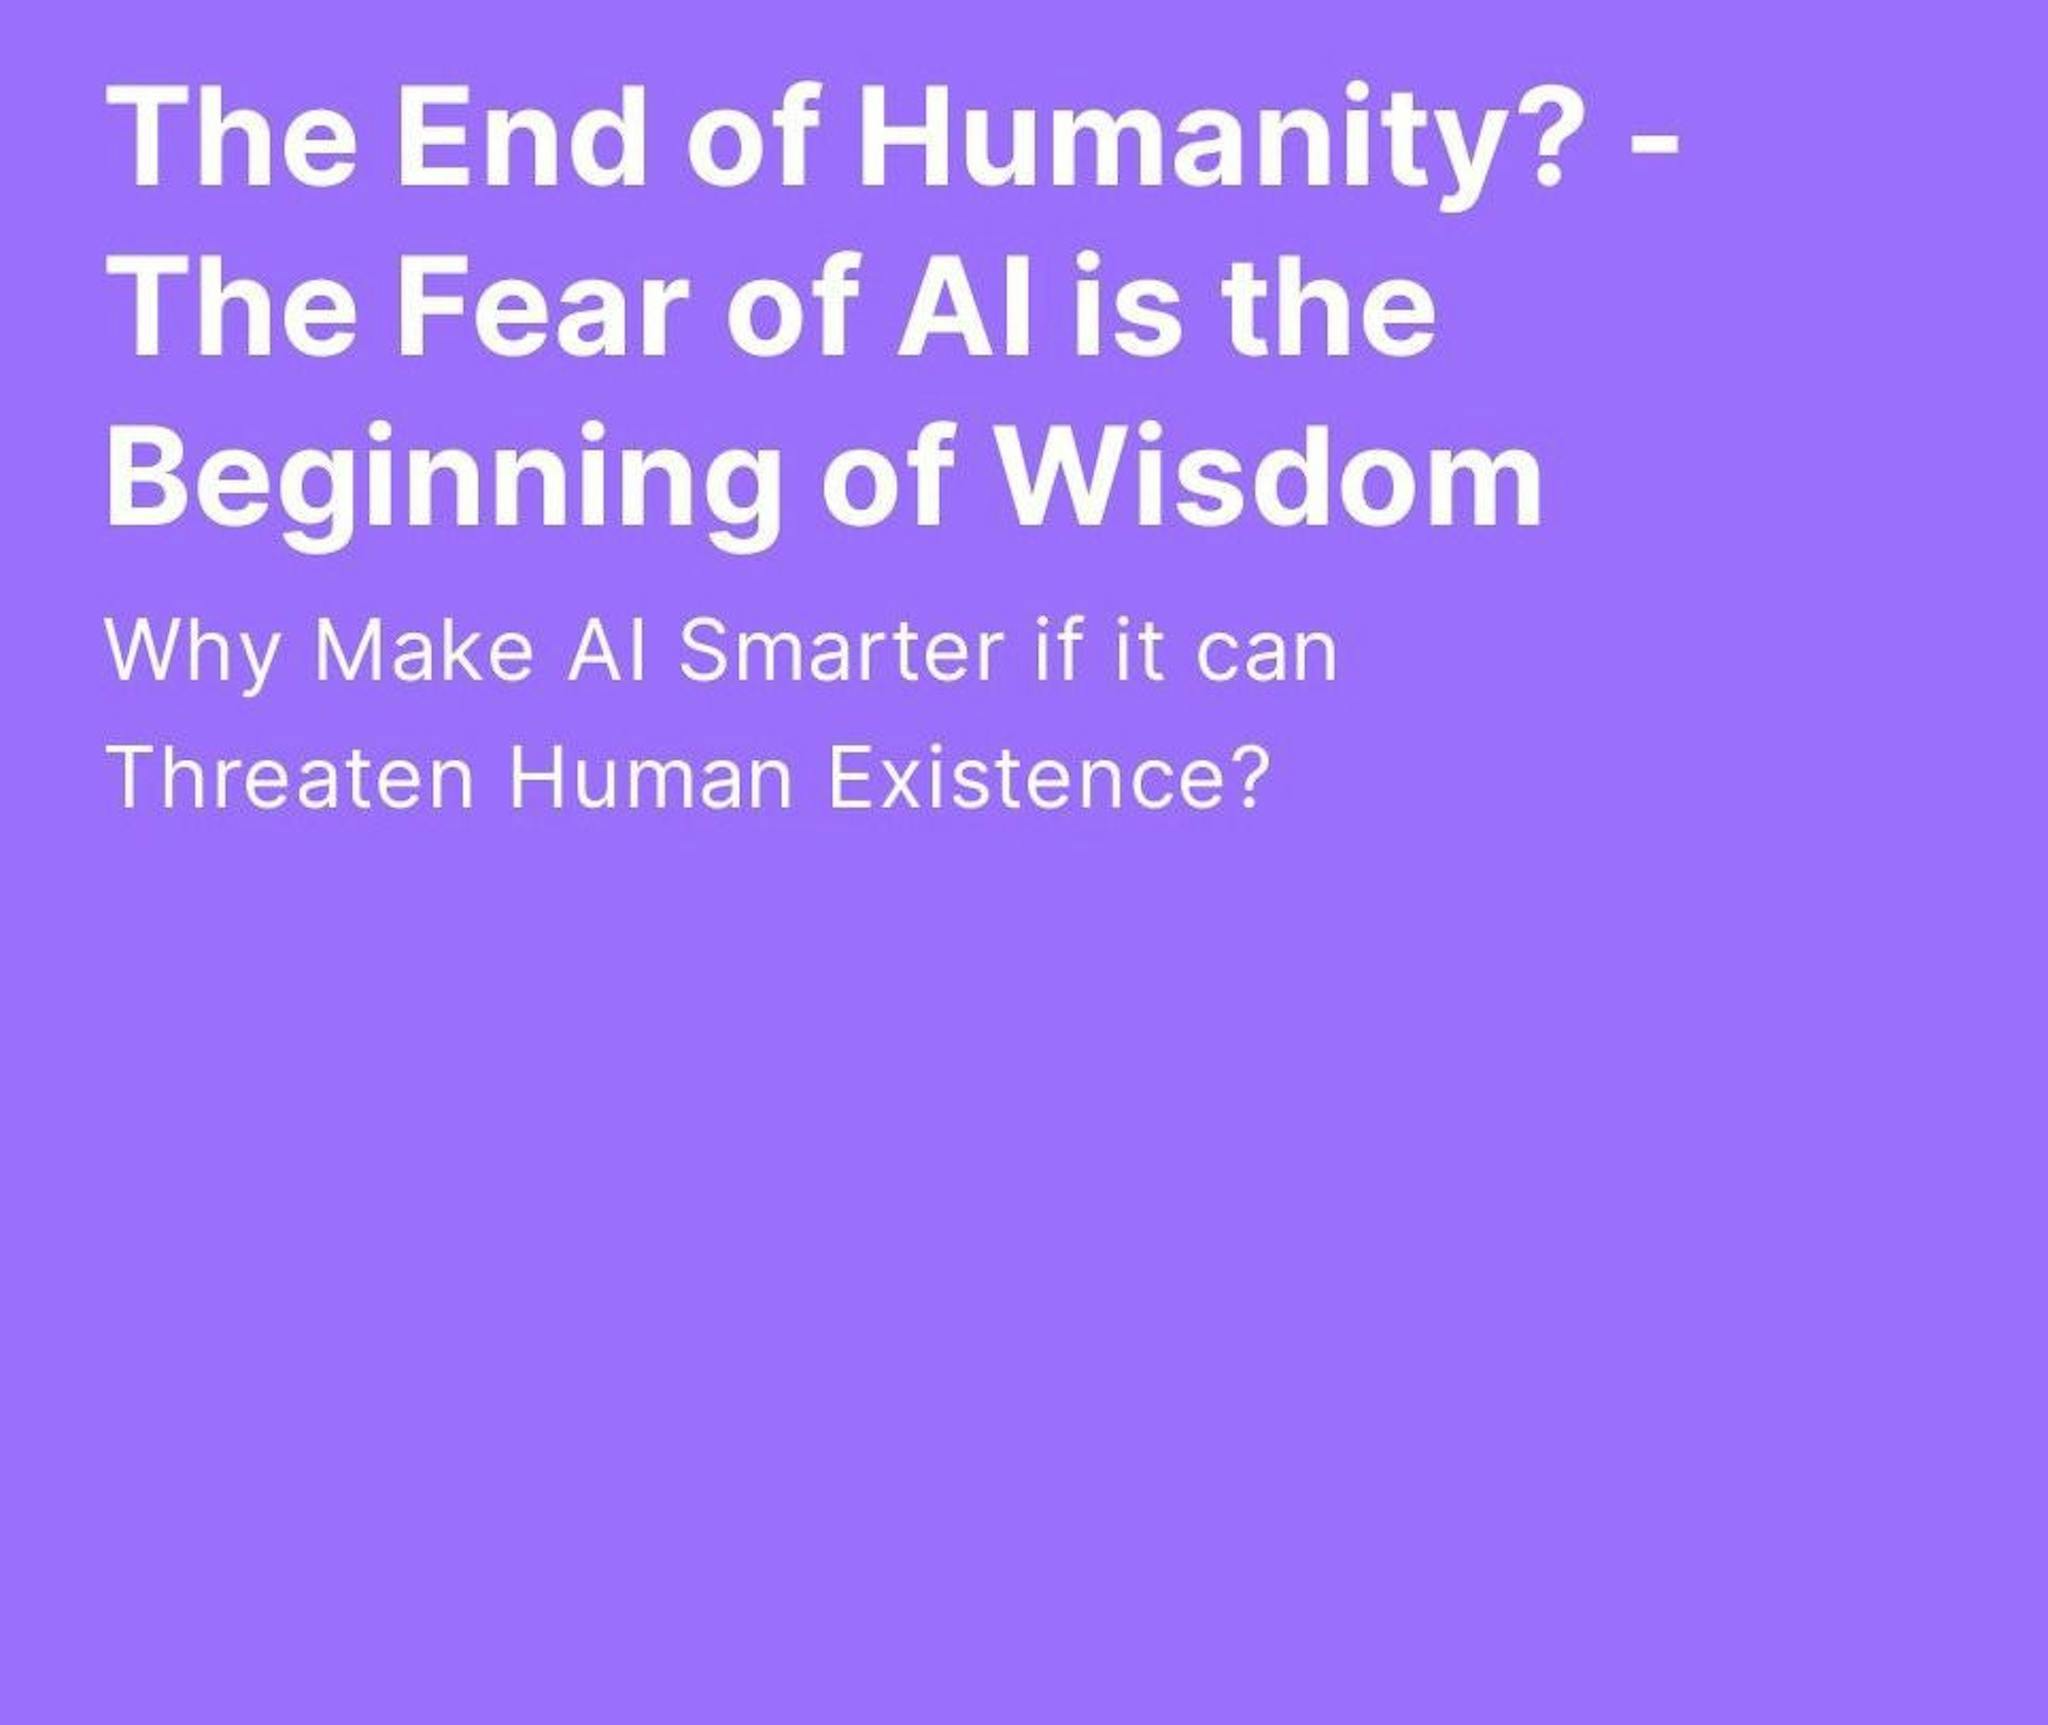 featured image - Wisdom Begins from The Fear of AI